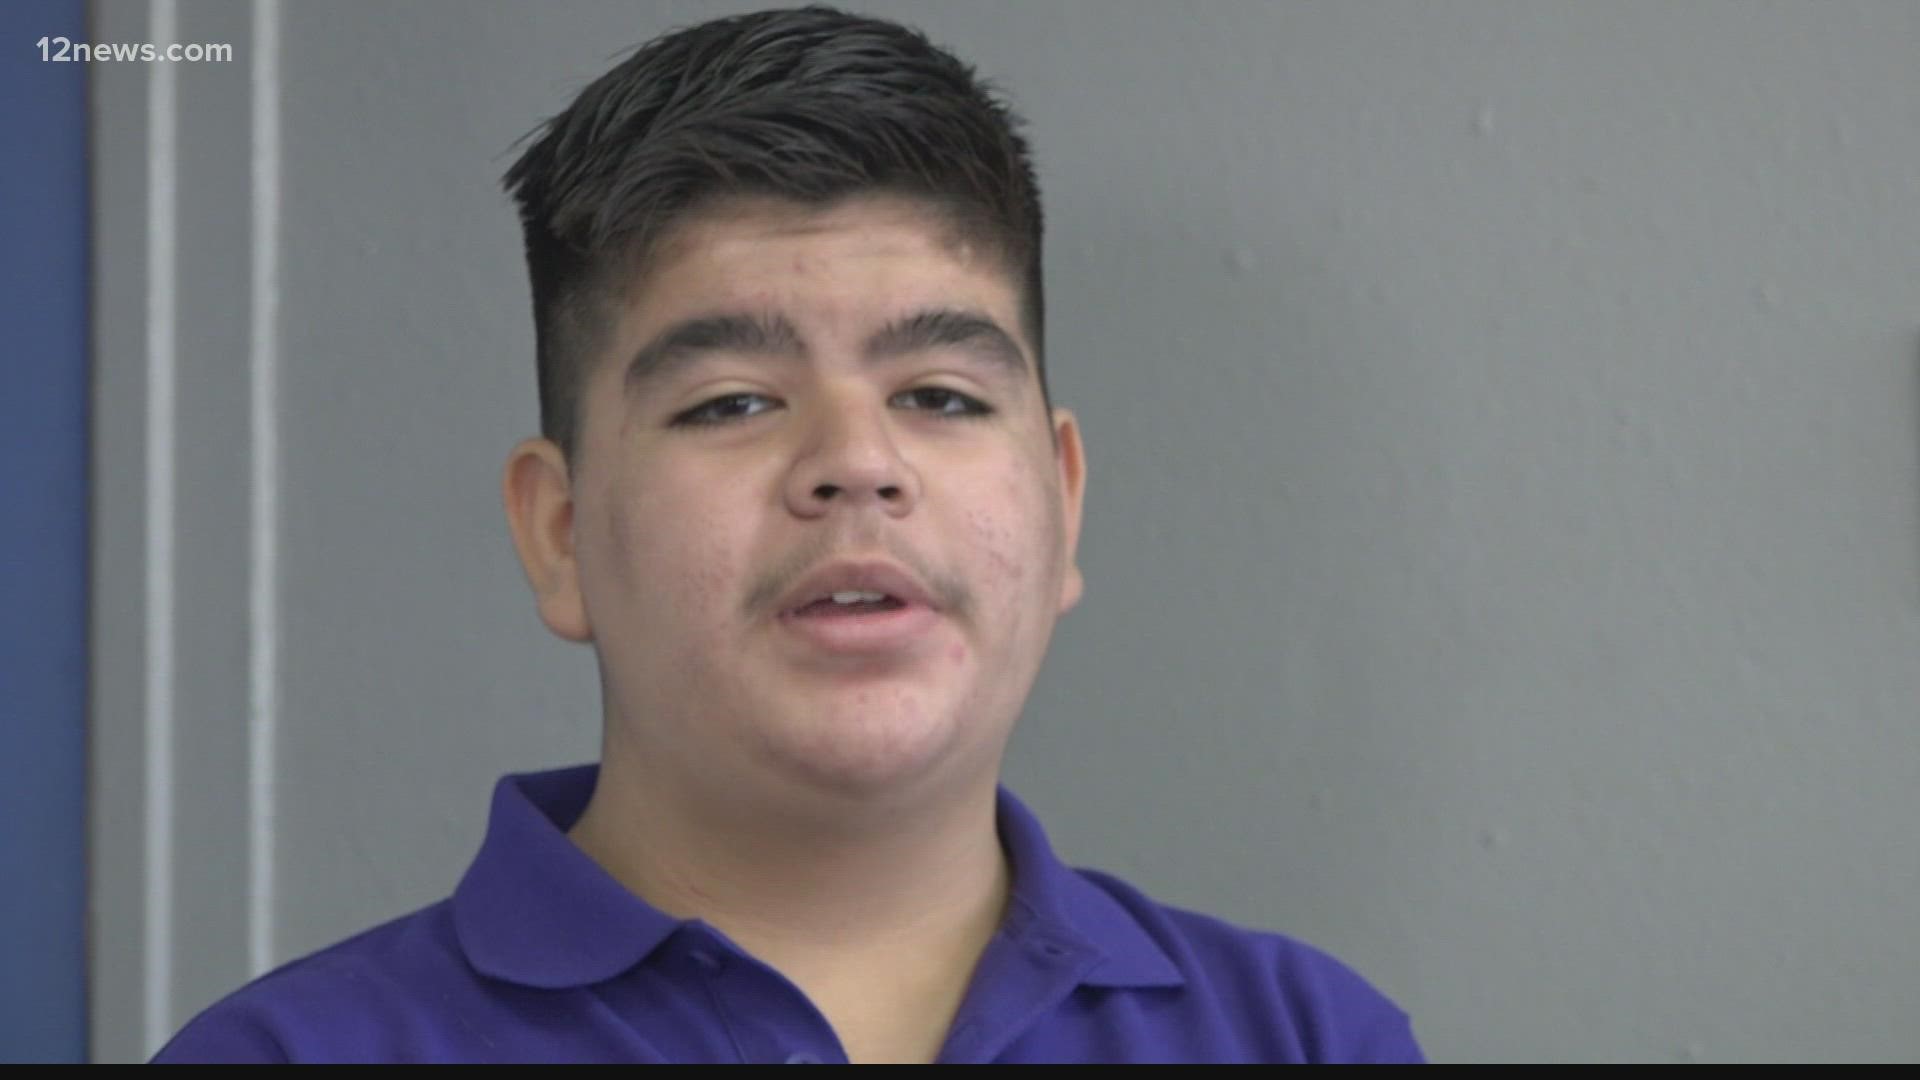 Diego Salas Salas, an eighth-grader at Bennett Academy in Phoenix started a penny challenge at his school to raise money for The Salvation Army.